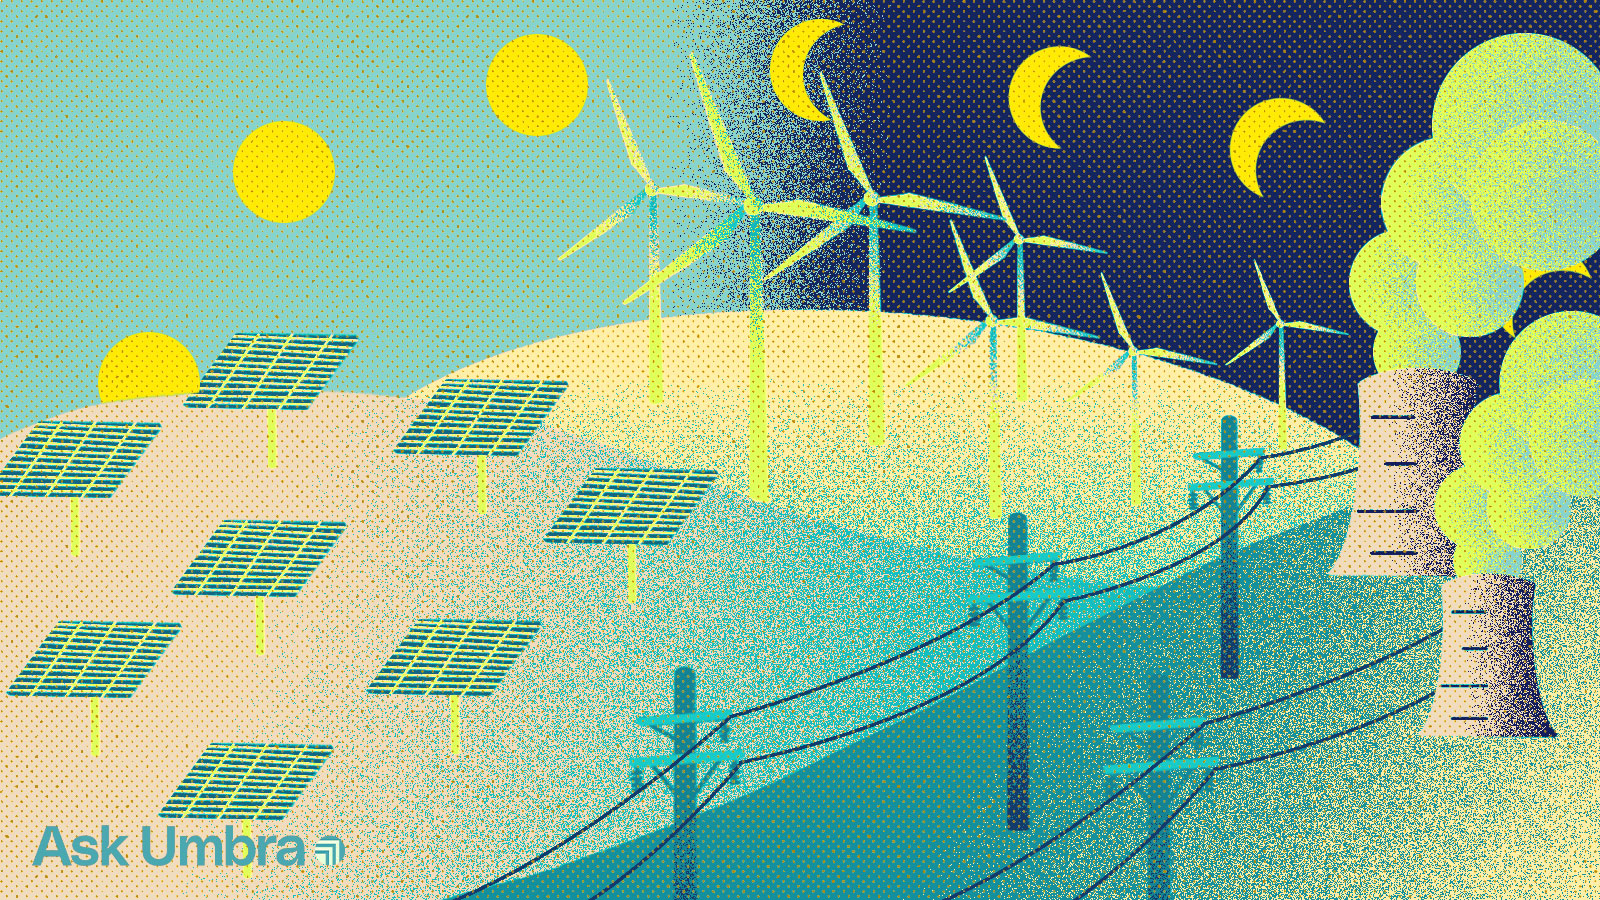 Illustration of a landscape with solar panels, wind turbines, cooling towers, and power lines